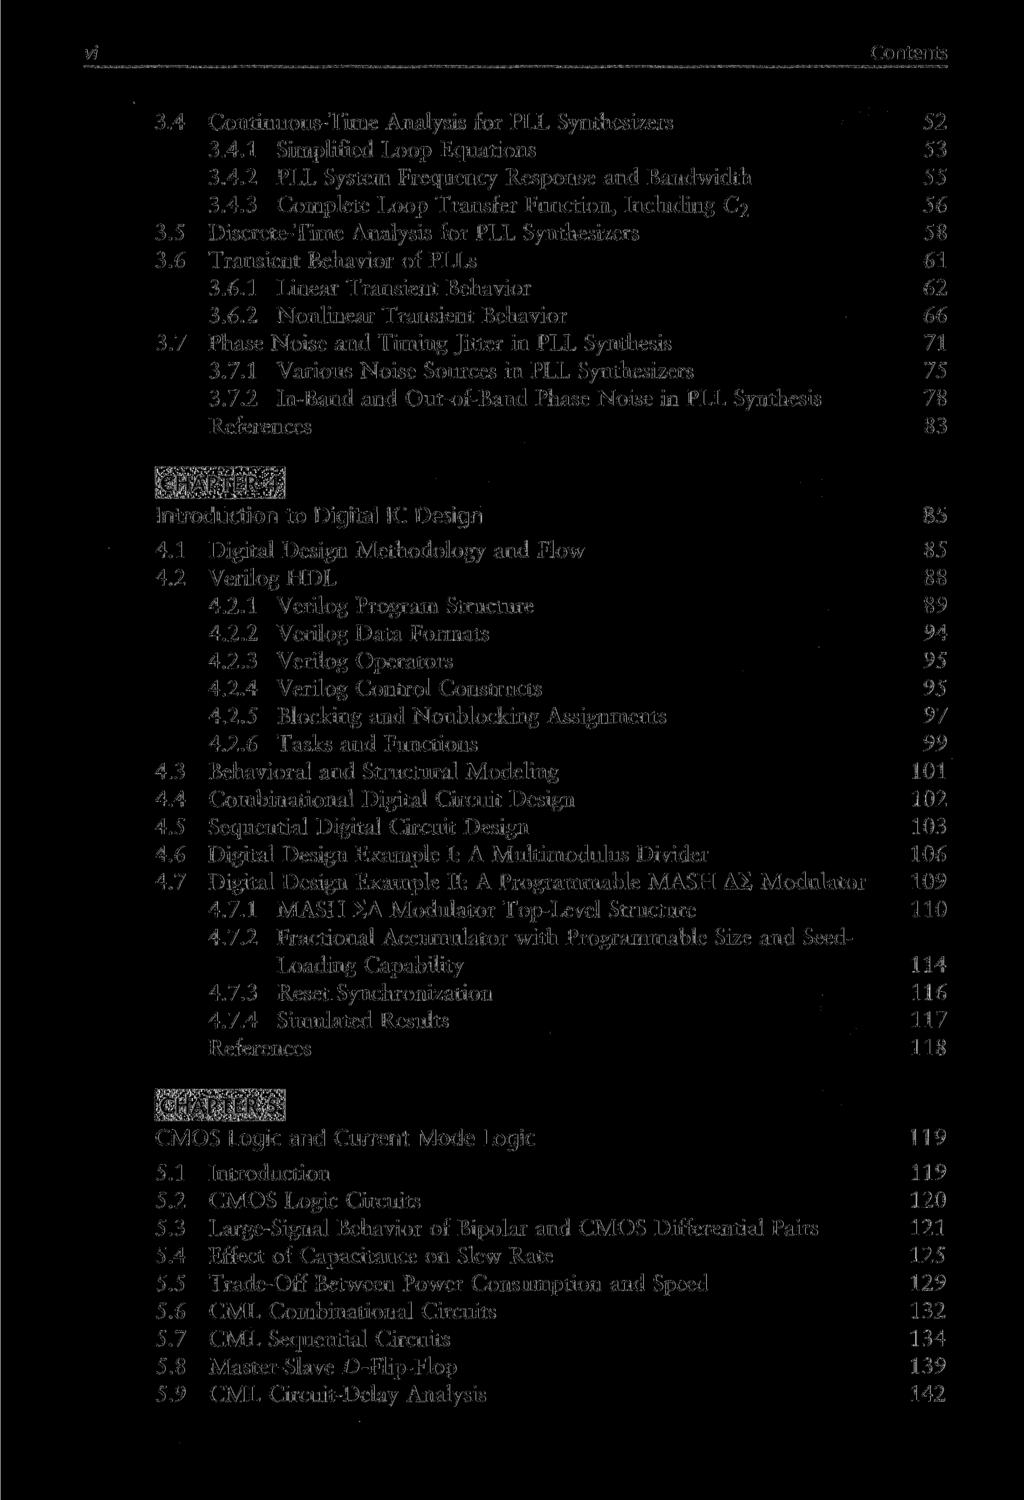 Contents 3.4 Continuous-Time Analysis for PLL Synthesizers 52 3.4.1 Simplified Loop Equations 53 3.4.2 PLL System Frequency Response and Bandwidth 55 3.4.3 Complete Loop Transfer Function, Including C2 56 3.